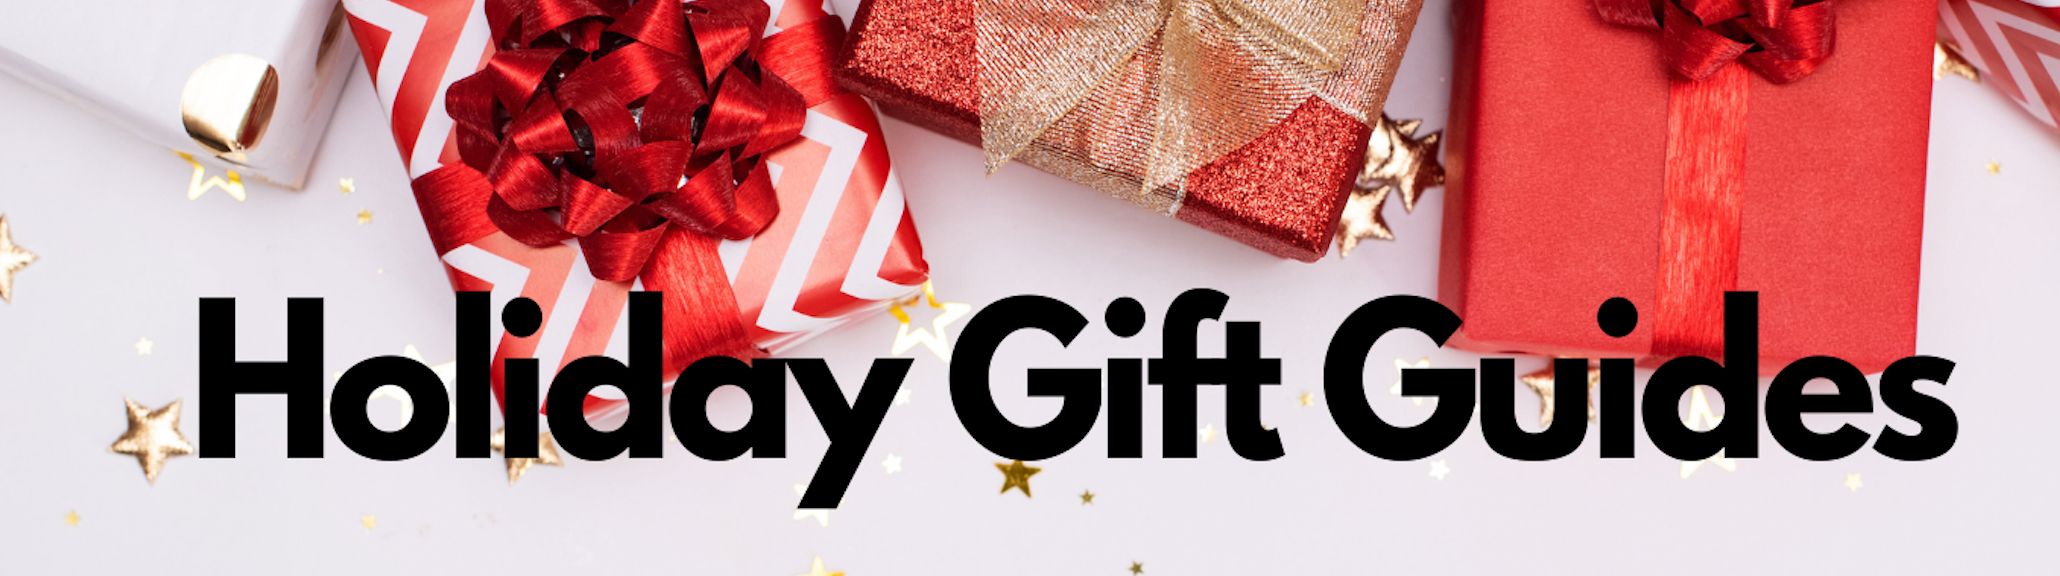 Gift Electronics Under INR 10,000 | LBB